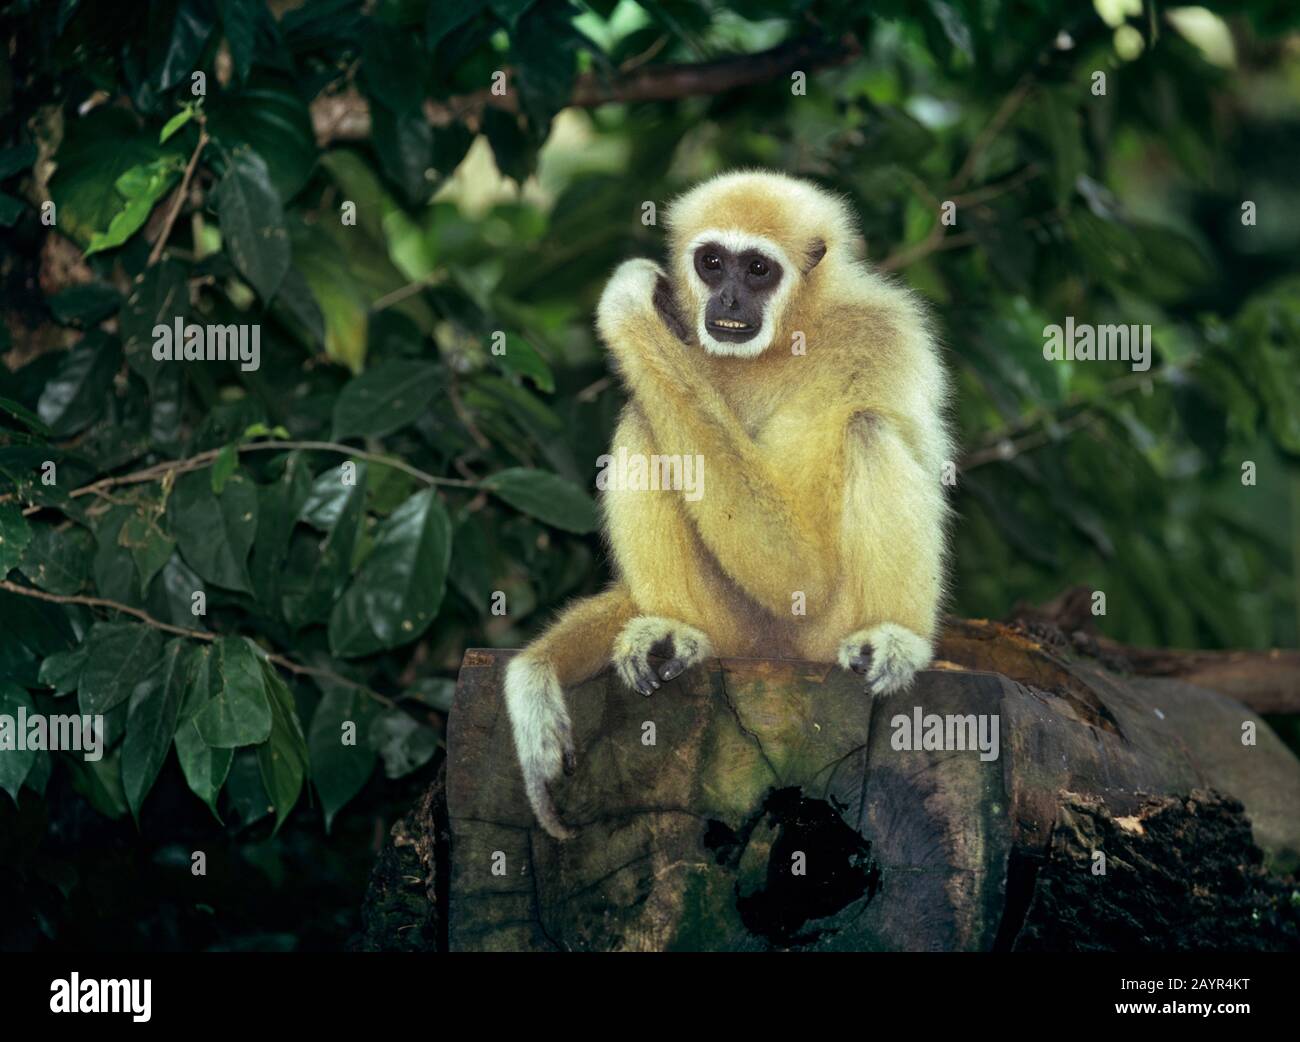 common gibbon, white-handed gibbon (Hylobates lar), young animal sitting on a dead tree trunk, sandy color Stock Photo